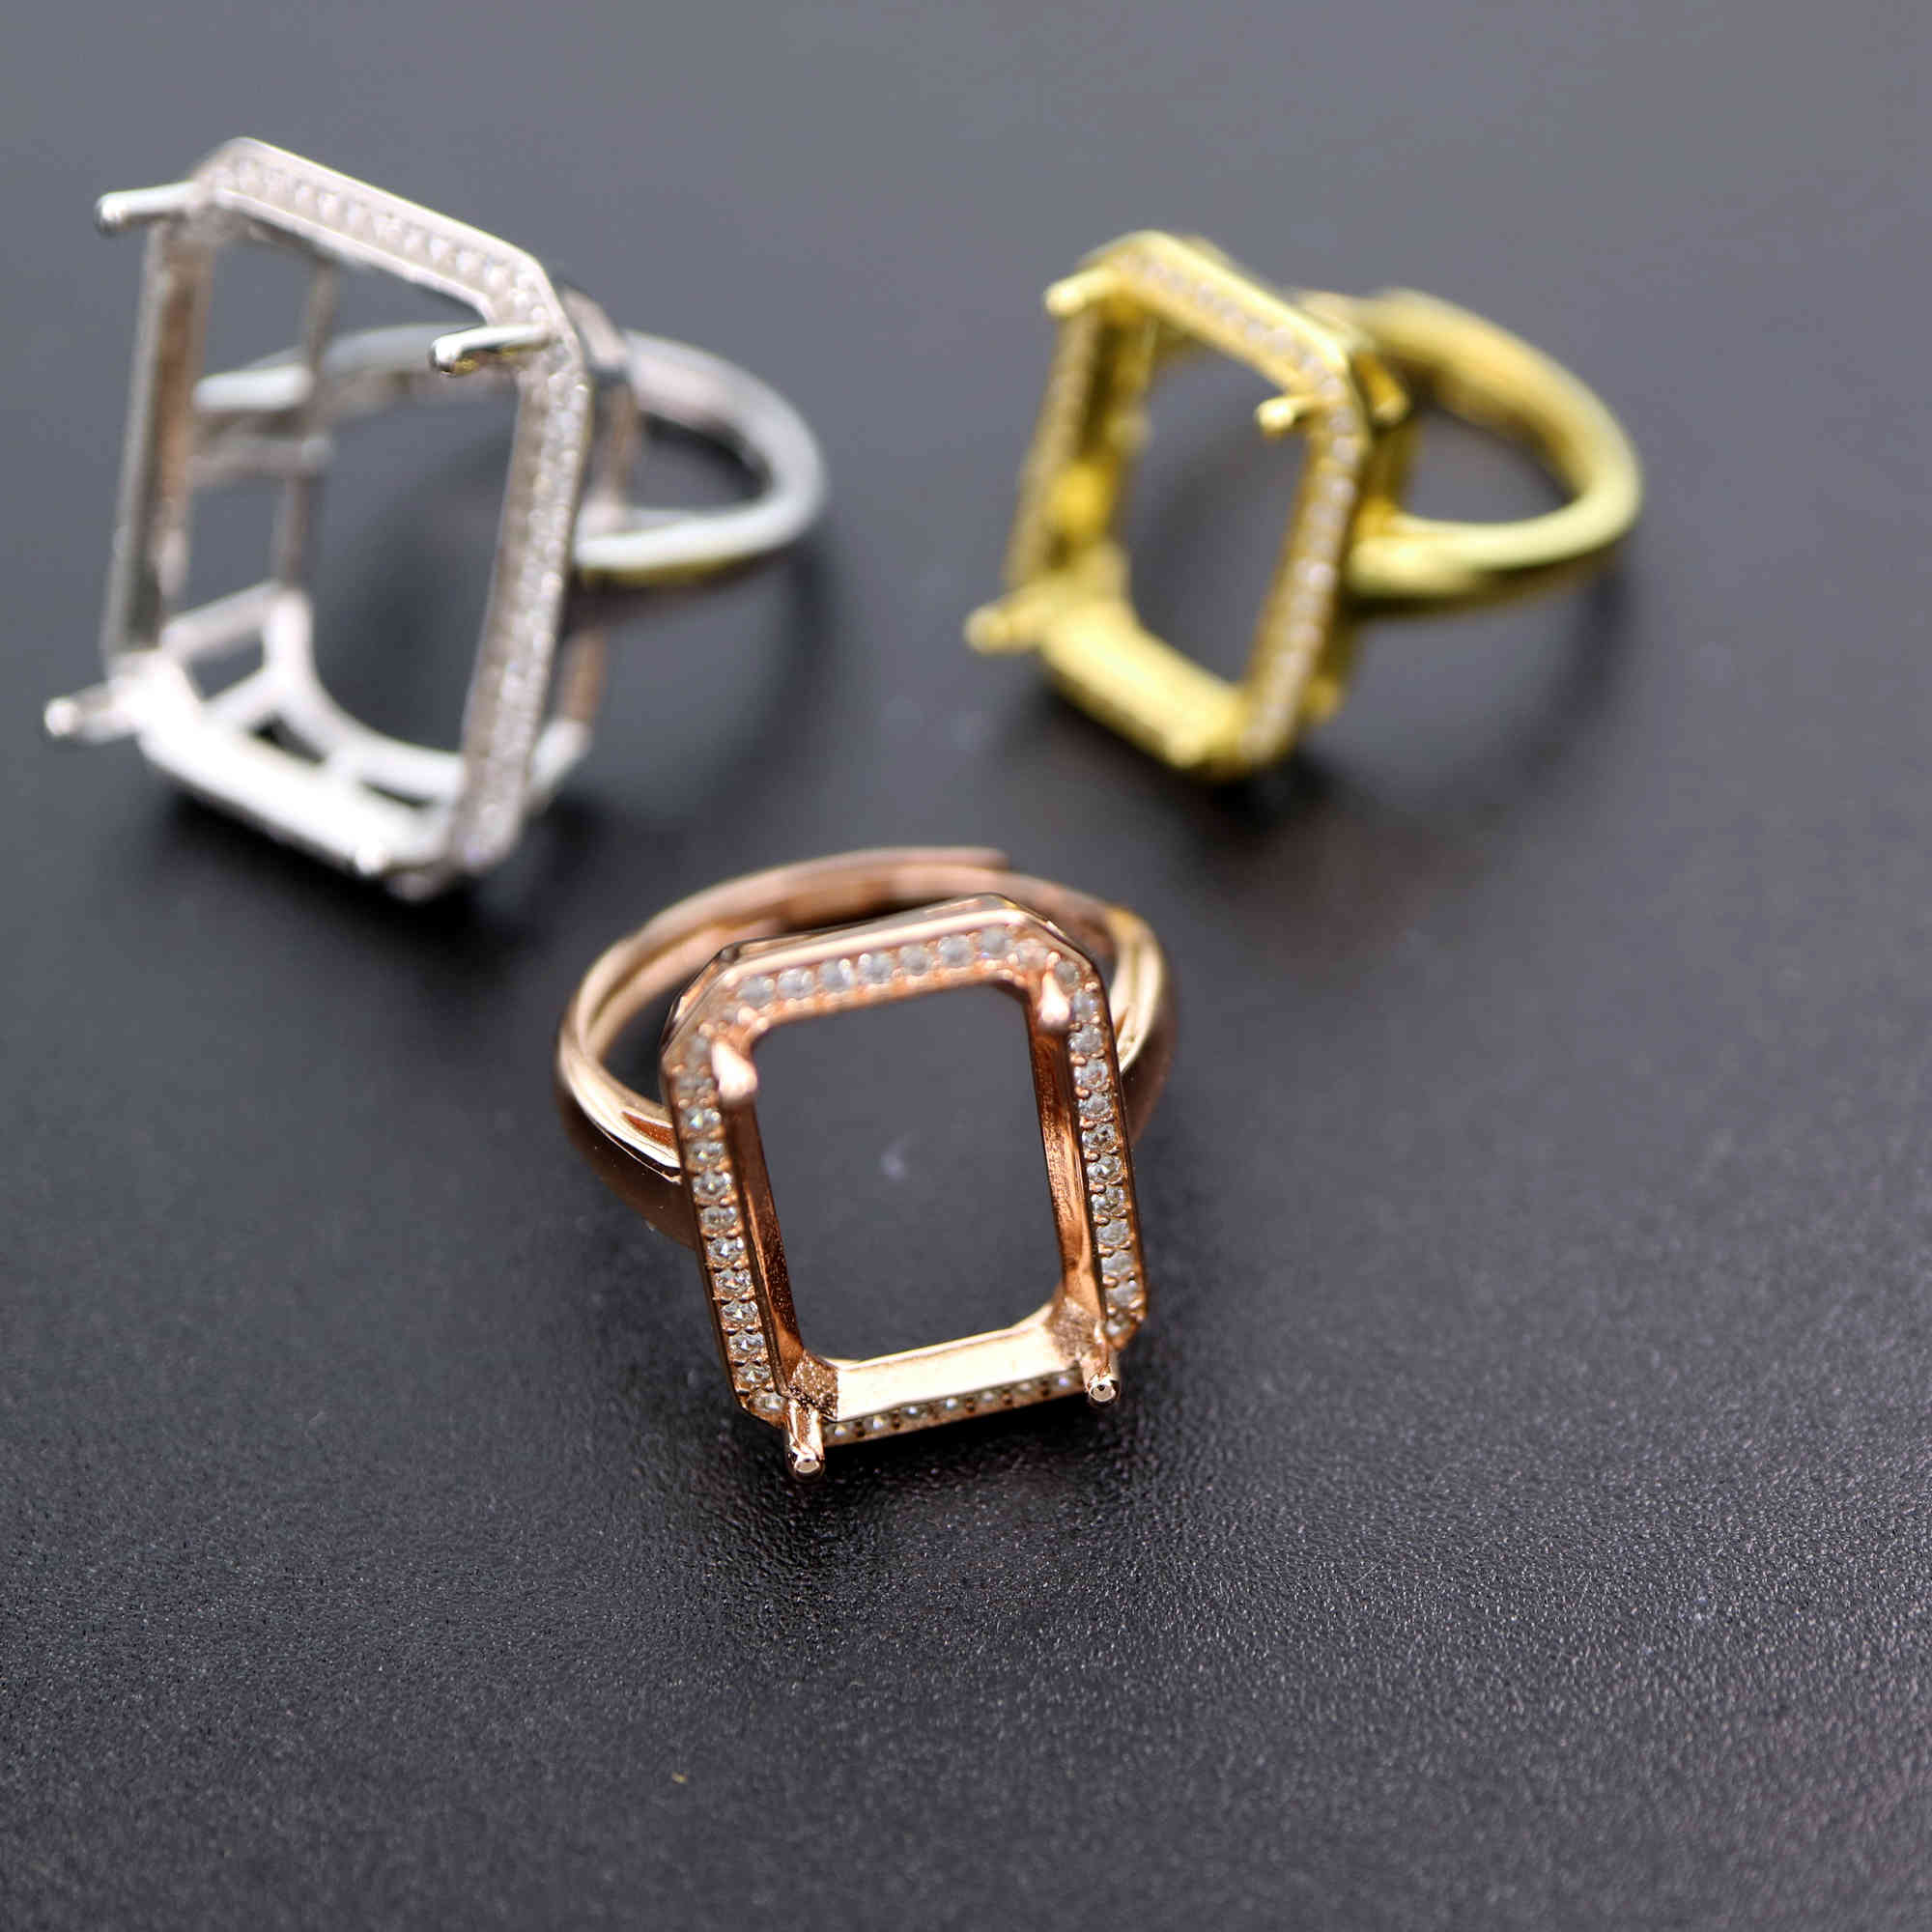 1Pcs Multiple Size Rectangle Silver Rose Gold Gemstone Cz Stone Luxury Big Prong Bezel Solid 925 Sterling Silver Adjustable Ring Settings 1294151 - Click Image to Close